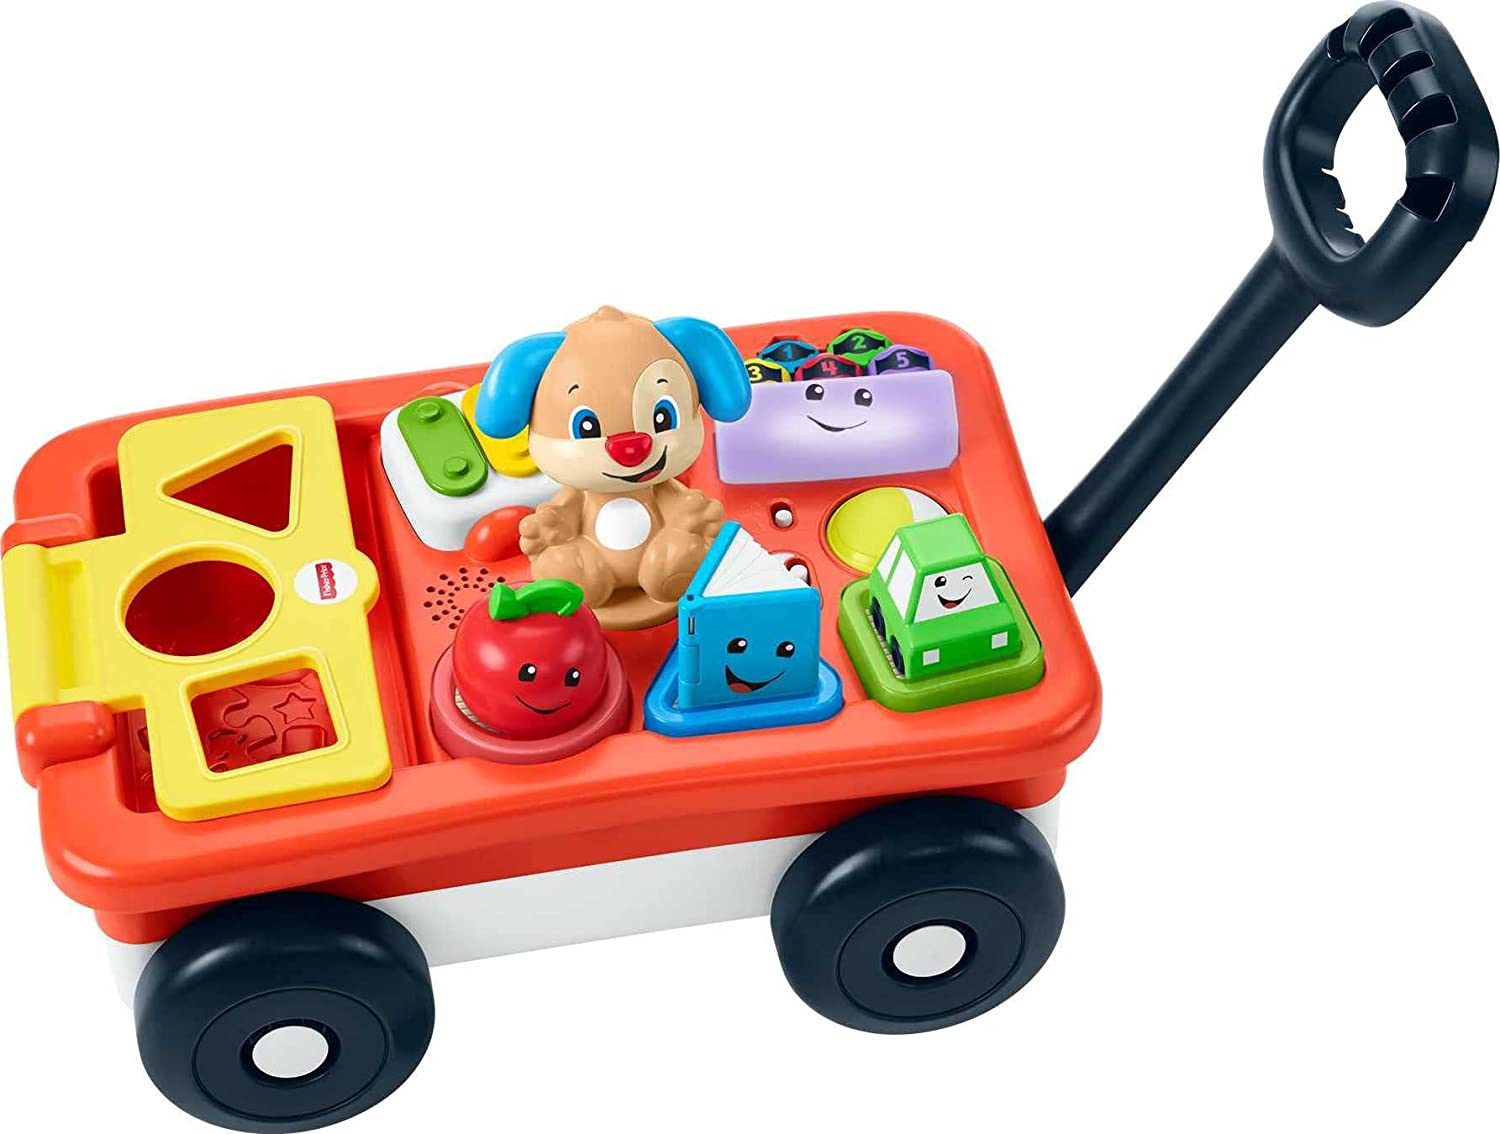 Fisher Price Play n Learn Wagon, best toys for 2-year-olds